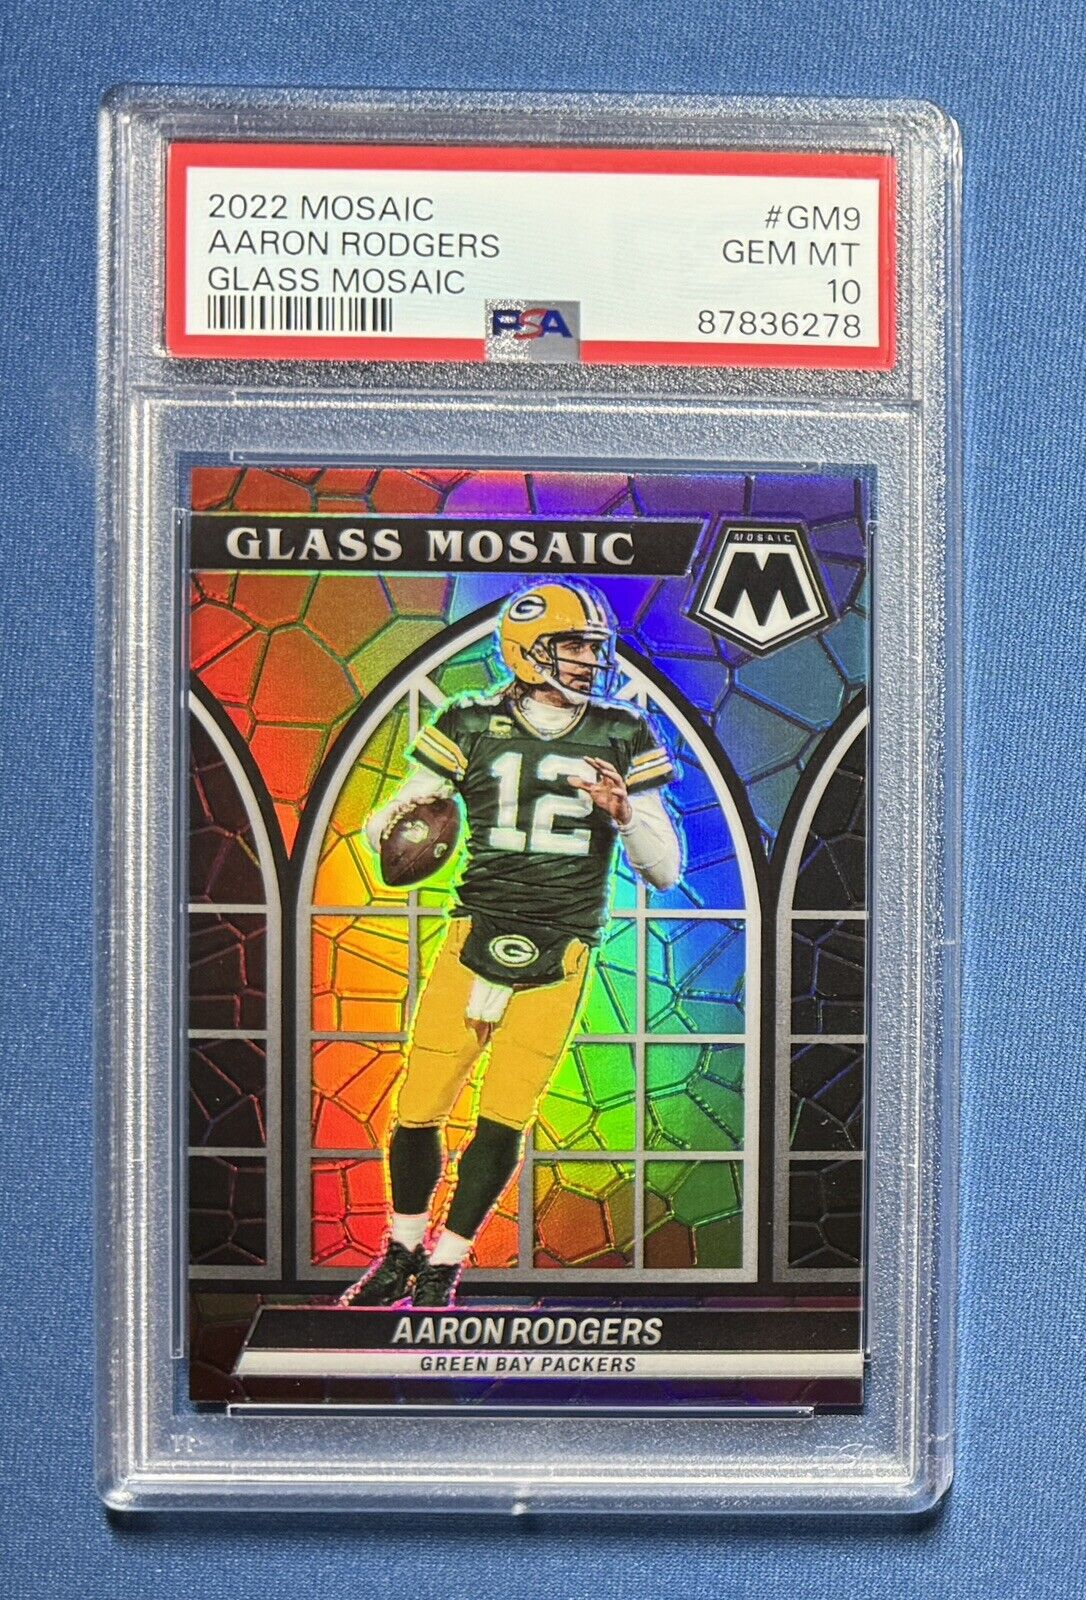 2022 Panini Mosaic Aaron Rodgers Stained Glass PSA 10 Packers GM-9